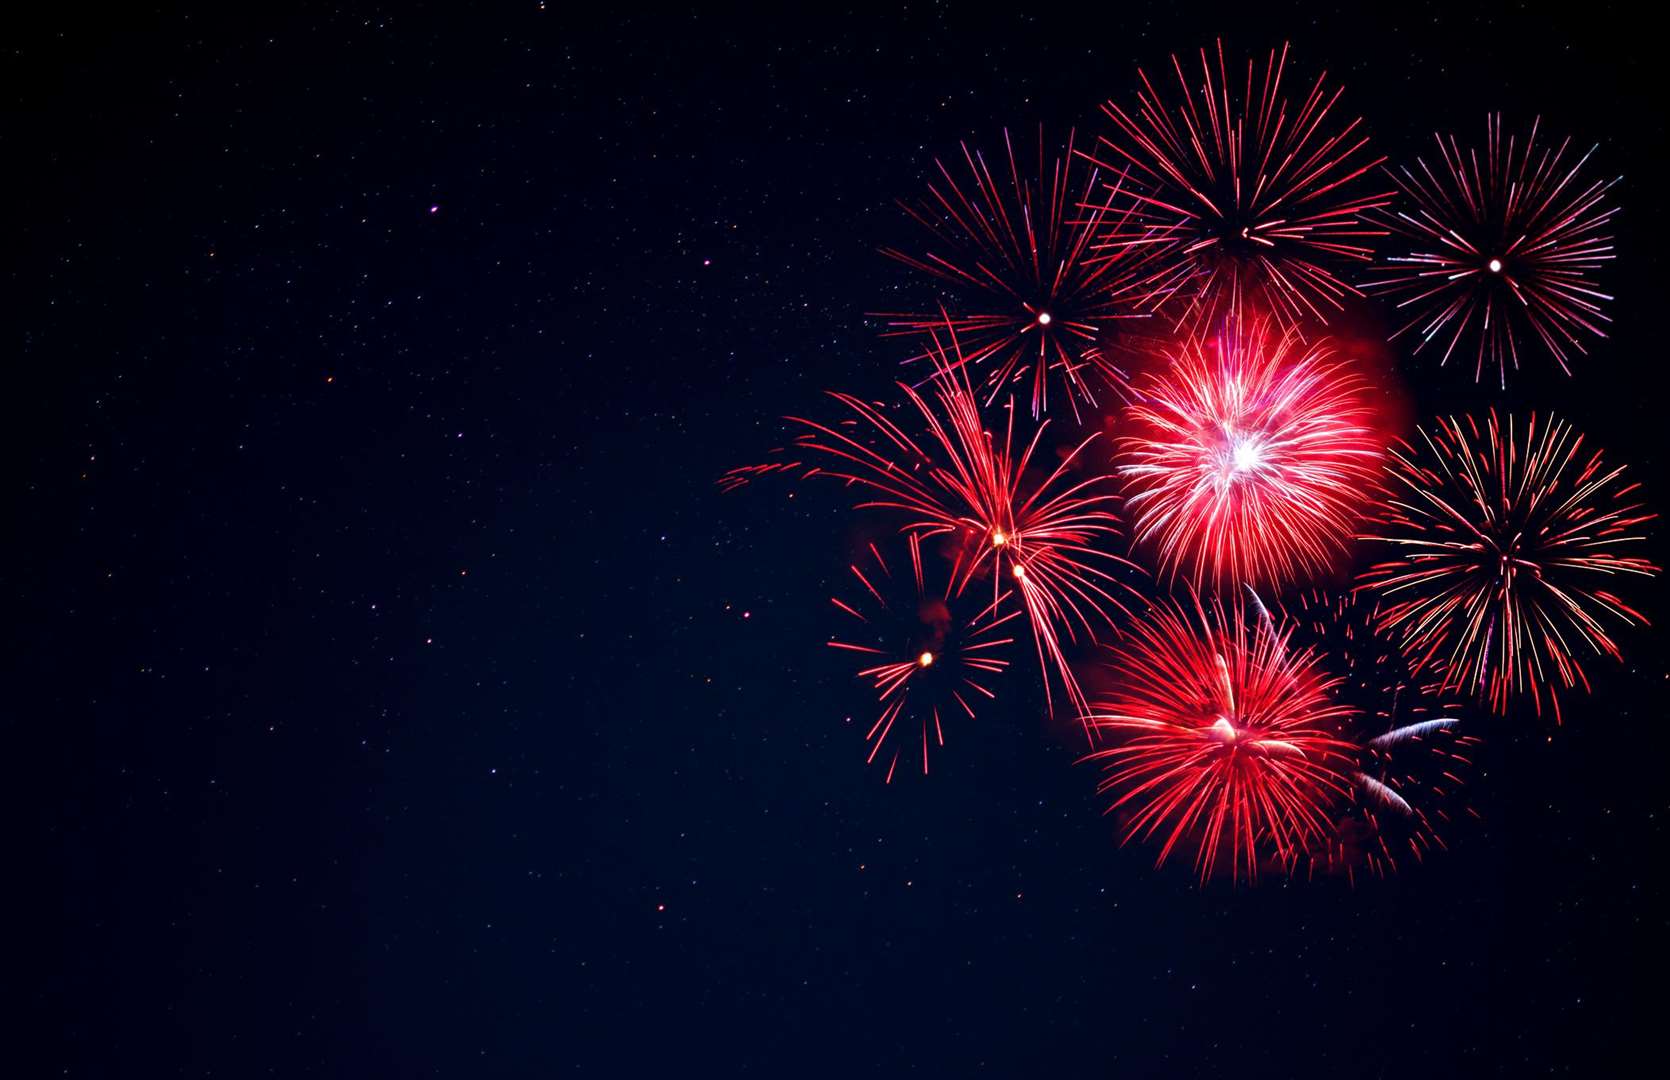 Check out our guide to fireworks displays